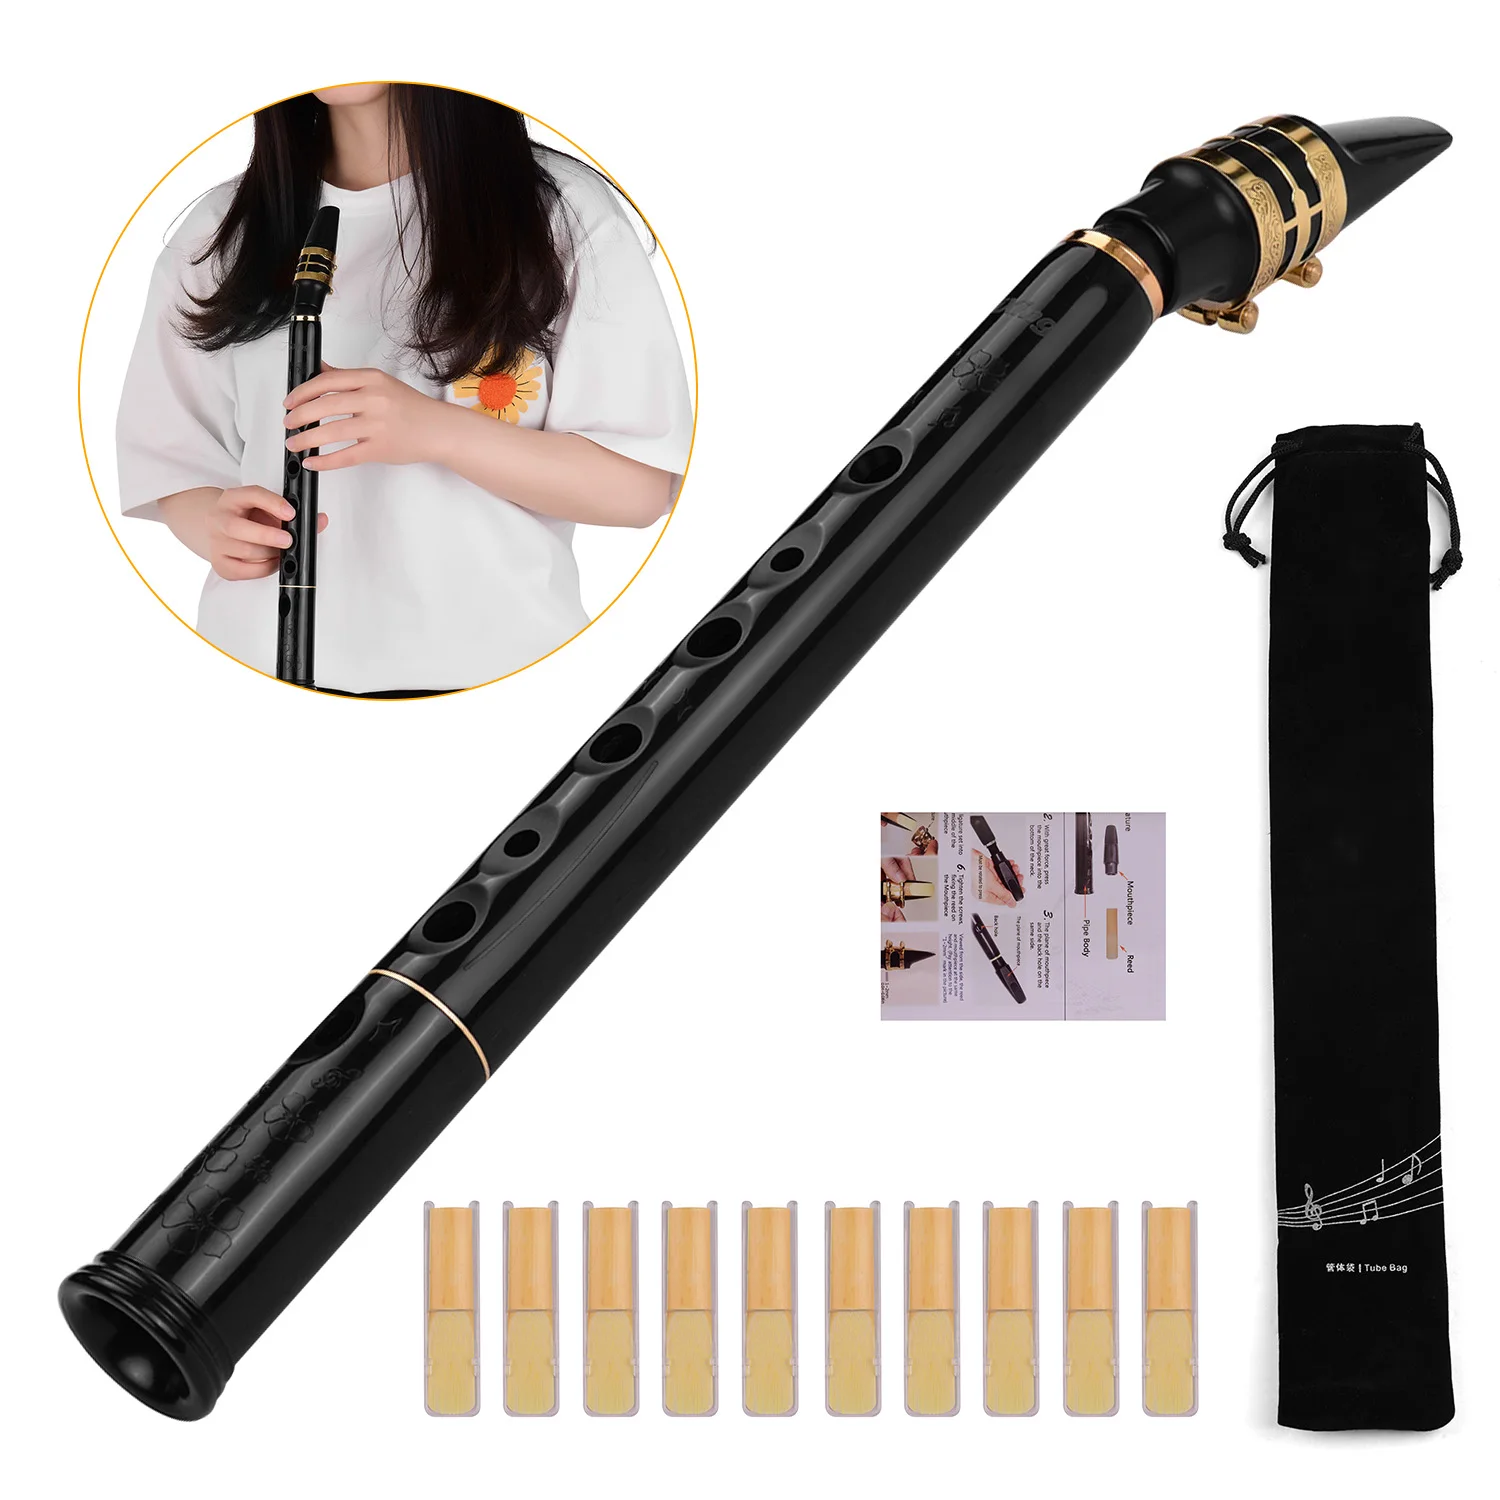 HiXing C Key Saxophone Set Mini Pocket Saxophone Sax Kit ABS Material with  Mouthpieces 10pcs Reeds Carrying Bag Black embossed